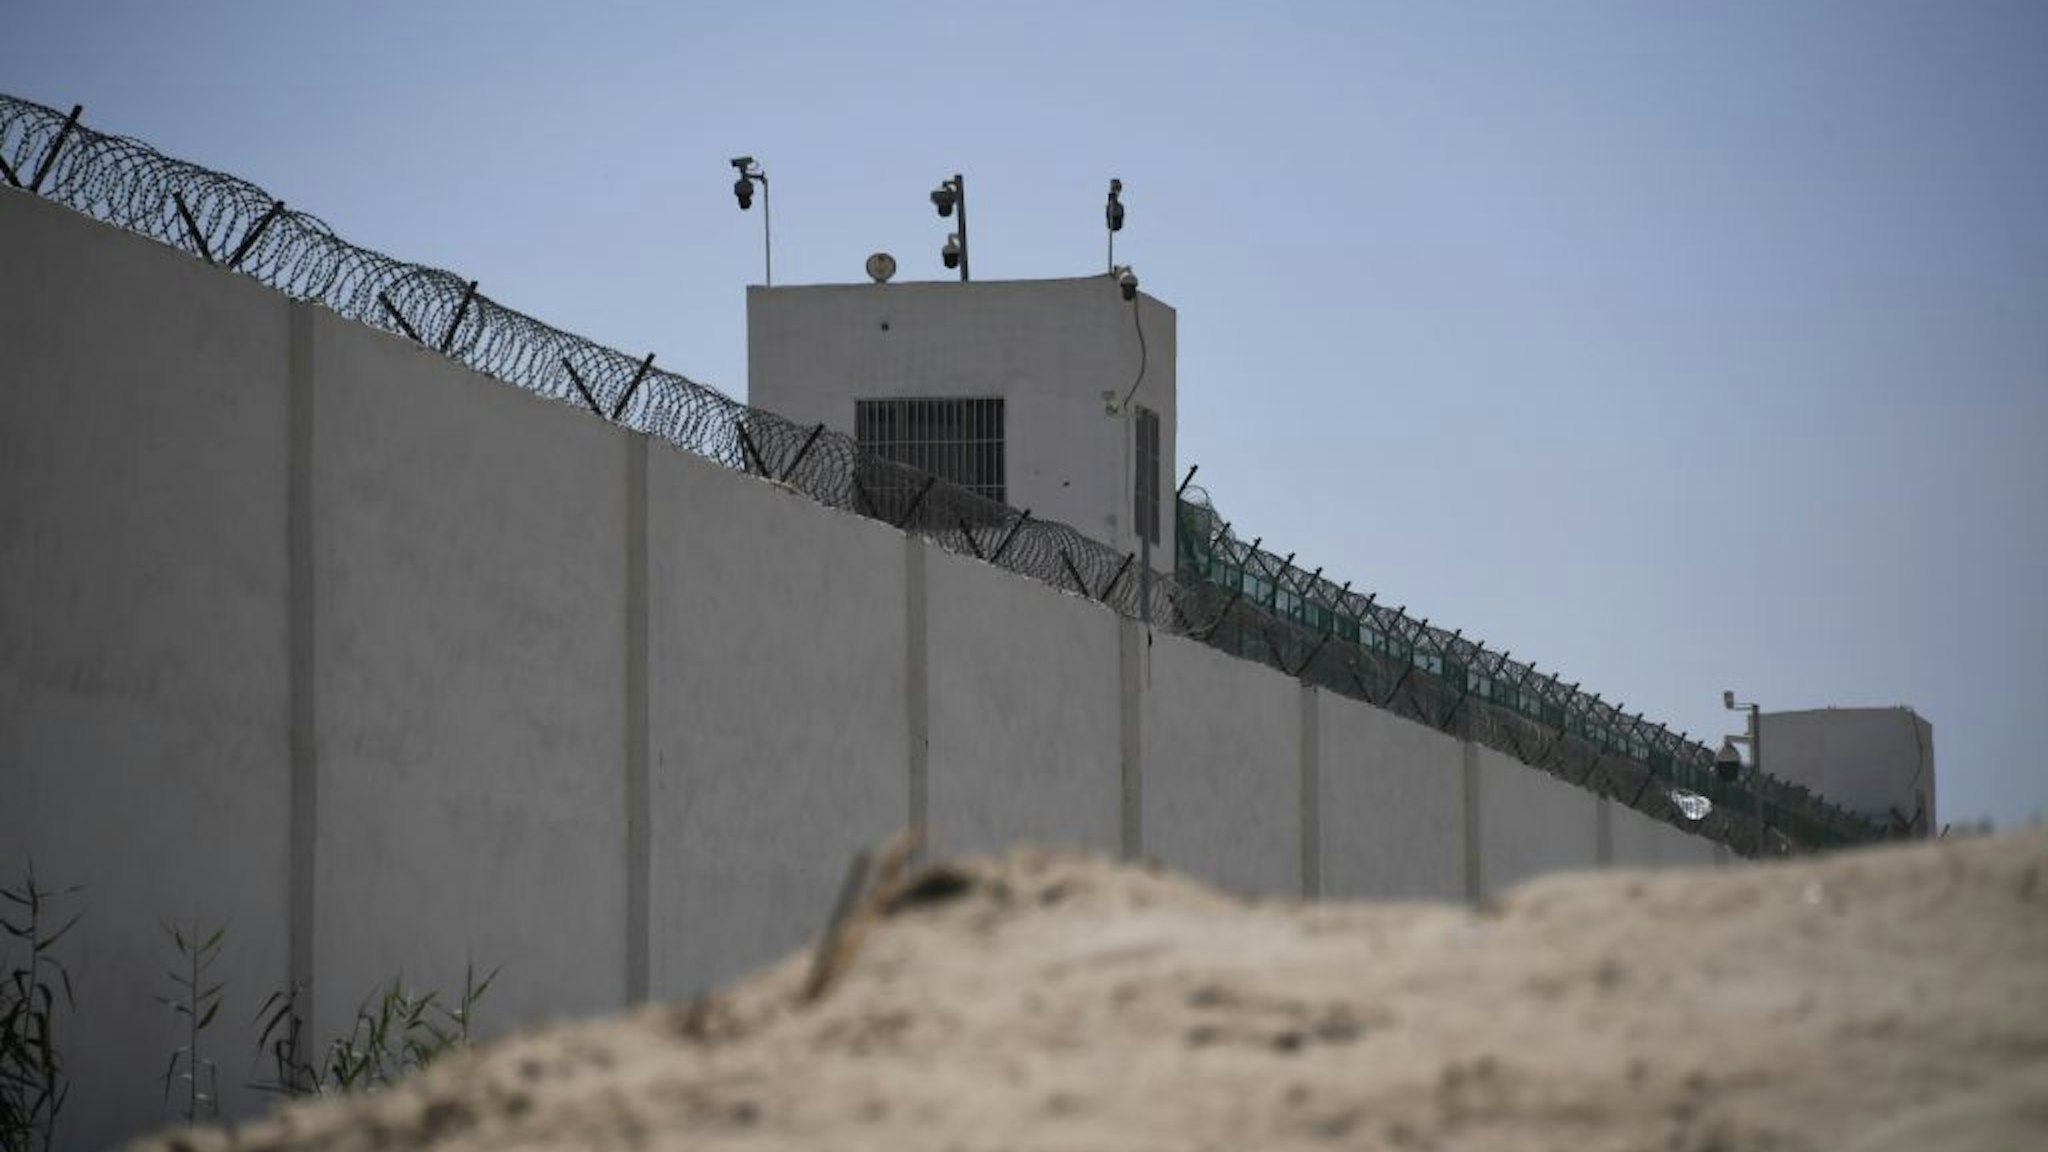 This photo taken on May 31, 2019 shows the outer wall of a complex which includes what is believed to be a re-education camp where mostly Muslim ethnic minorities are detained, on the outskirts of Hotan, in China's northwestern Xinjiang region.